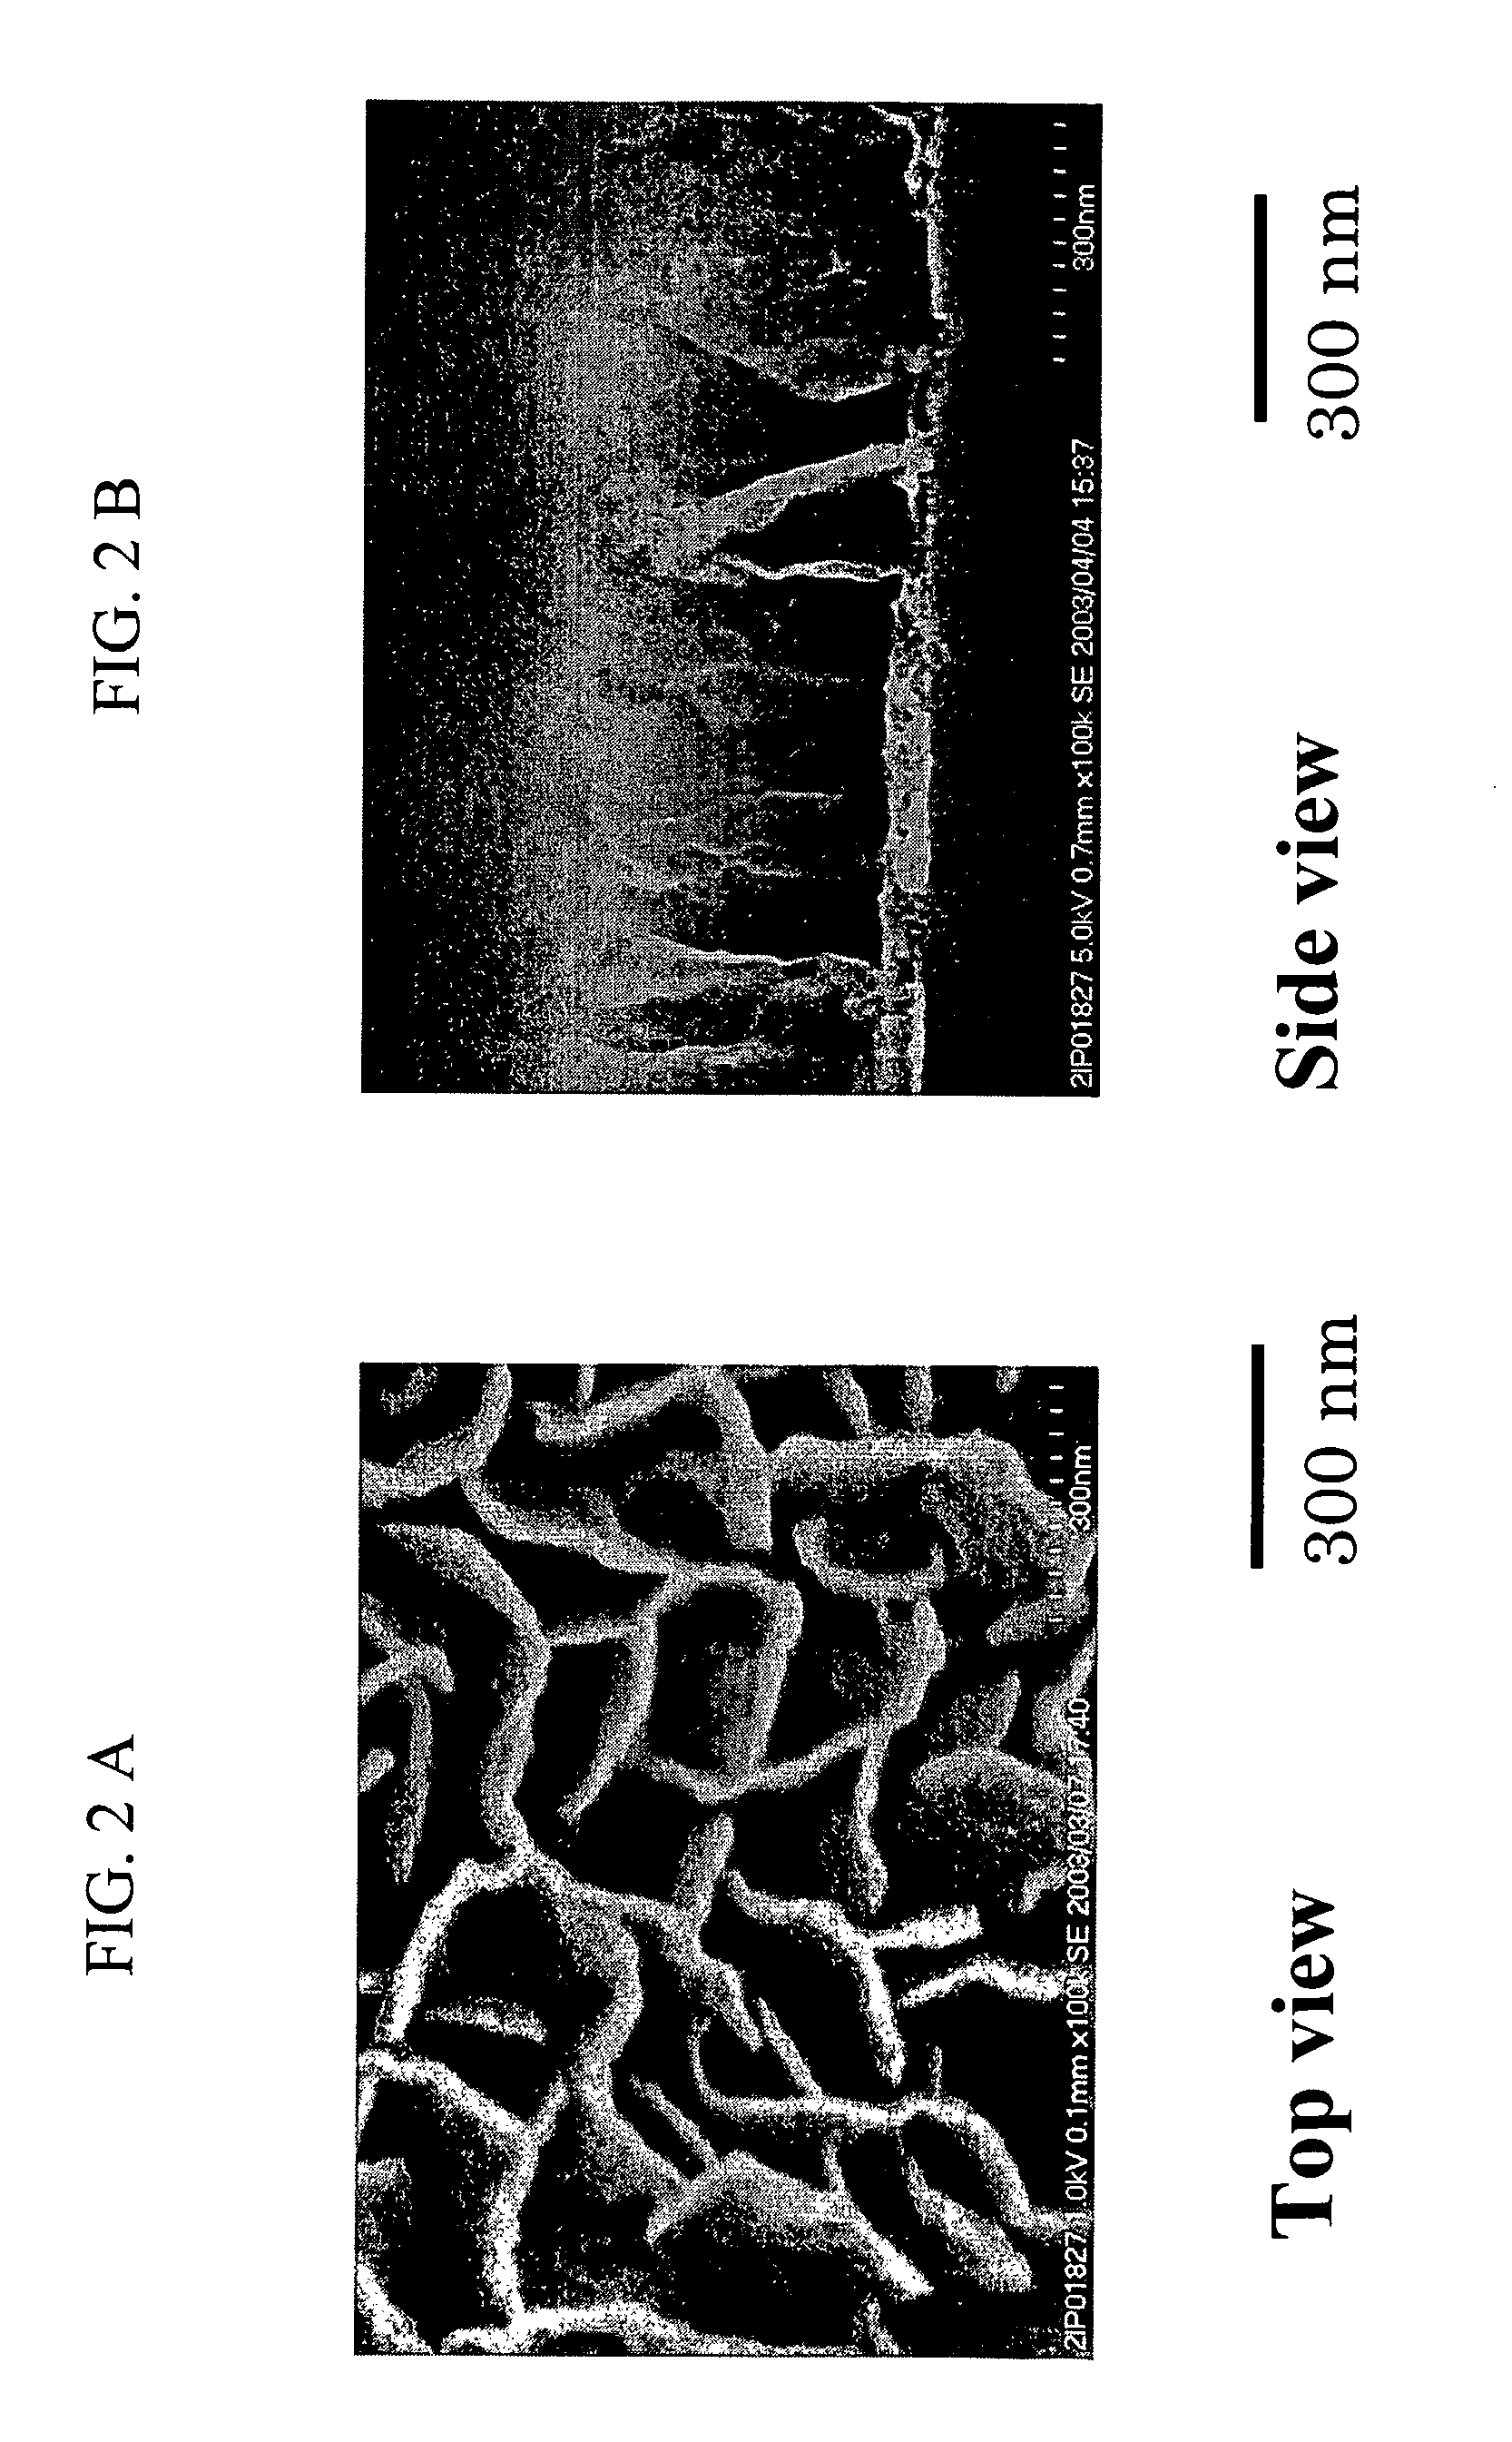 Nanoimprint Mold, Method of Forming a Nonopattern, and a Resin-Molded Product